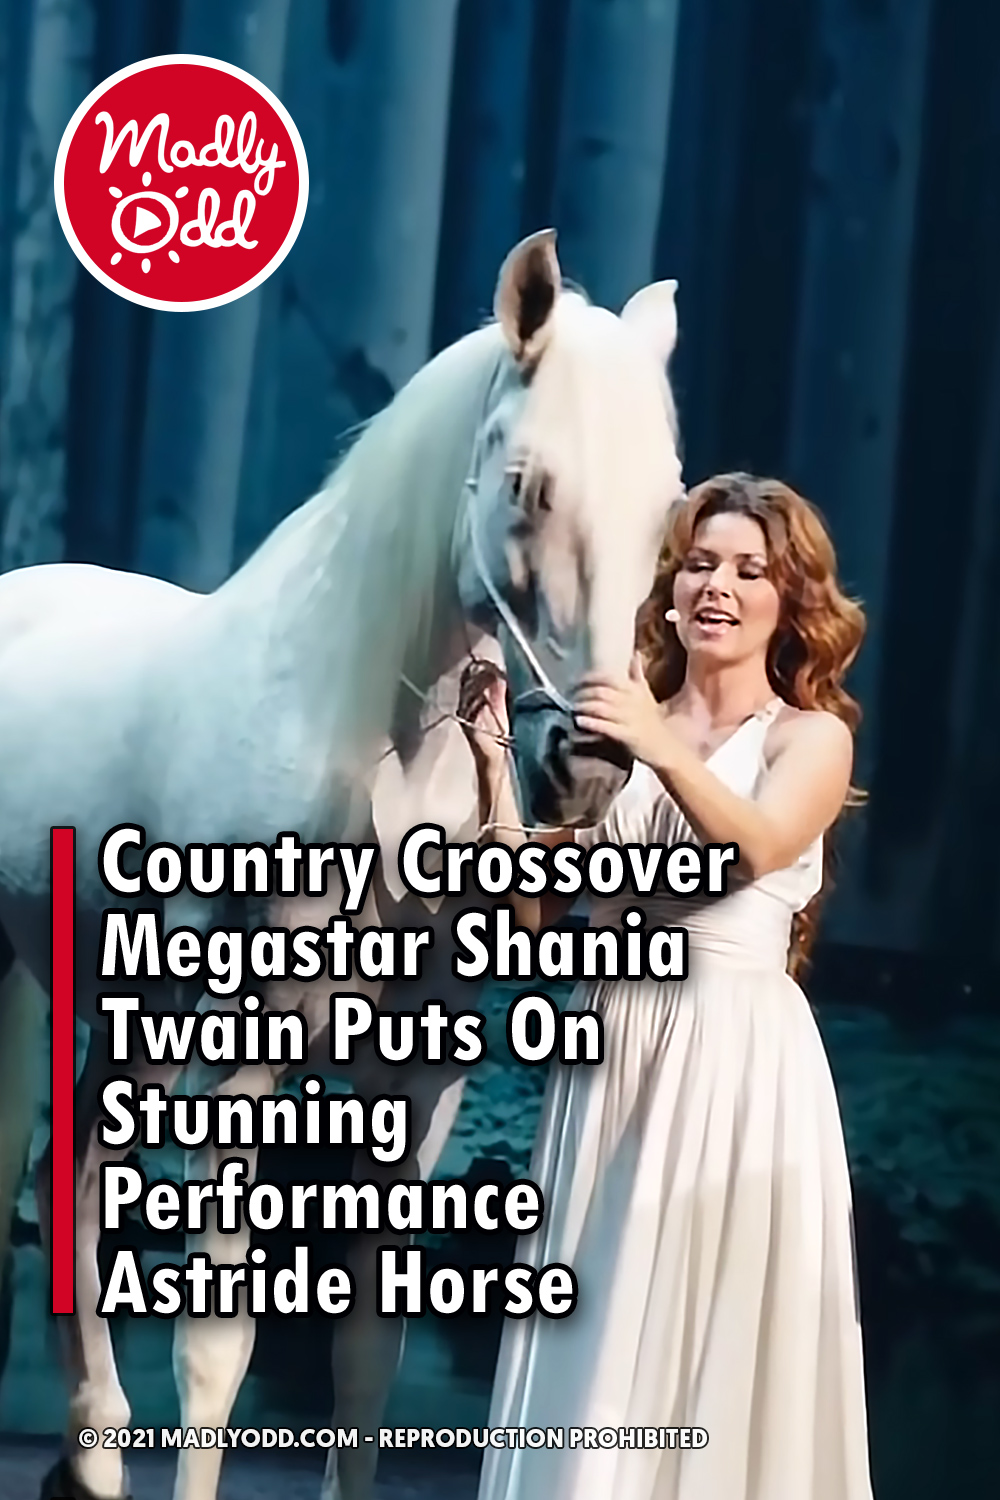 Country Crossover Megastar Shania Twain Puts On Stunning Performance Astride Horse